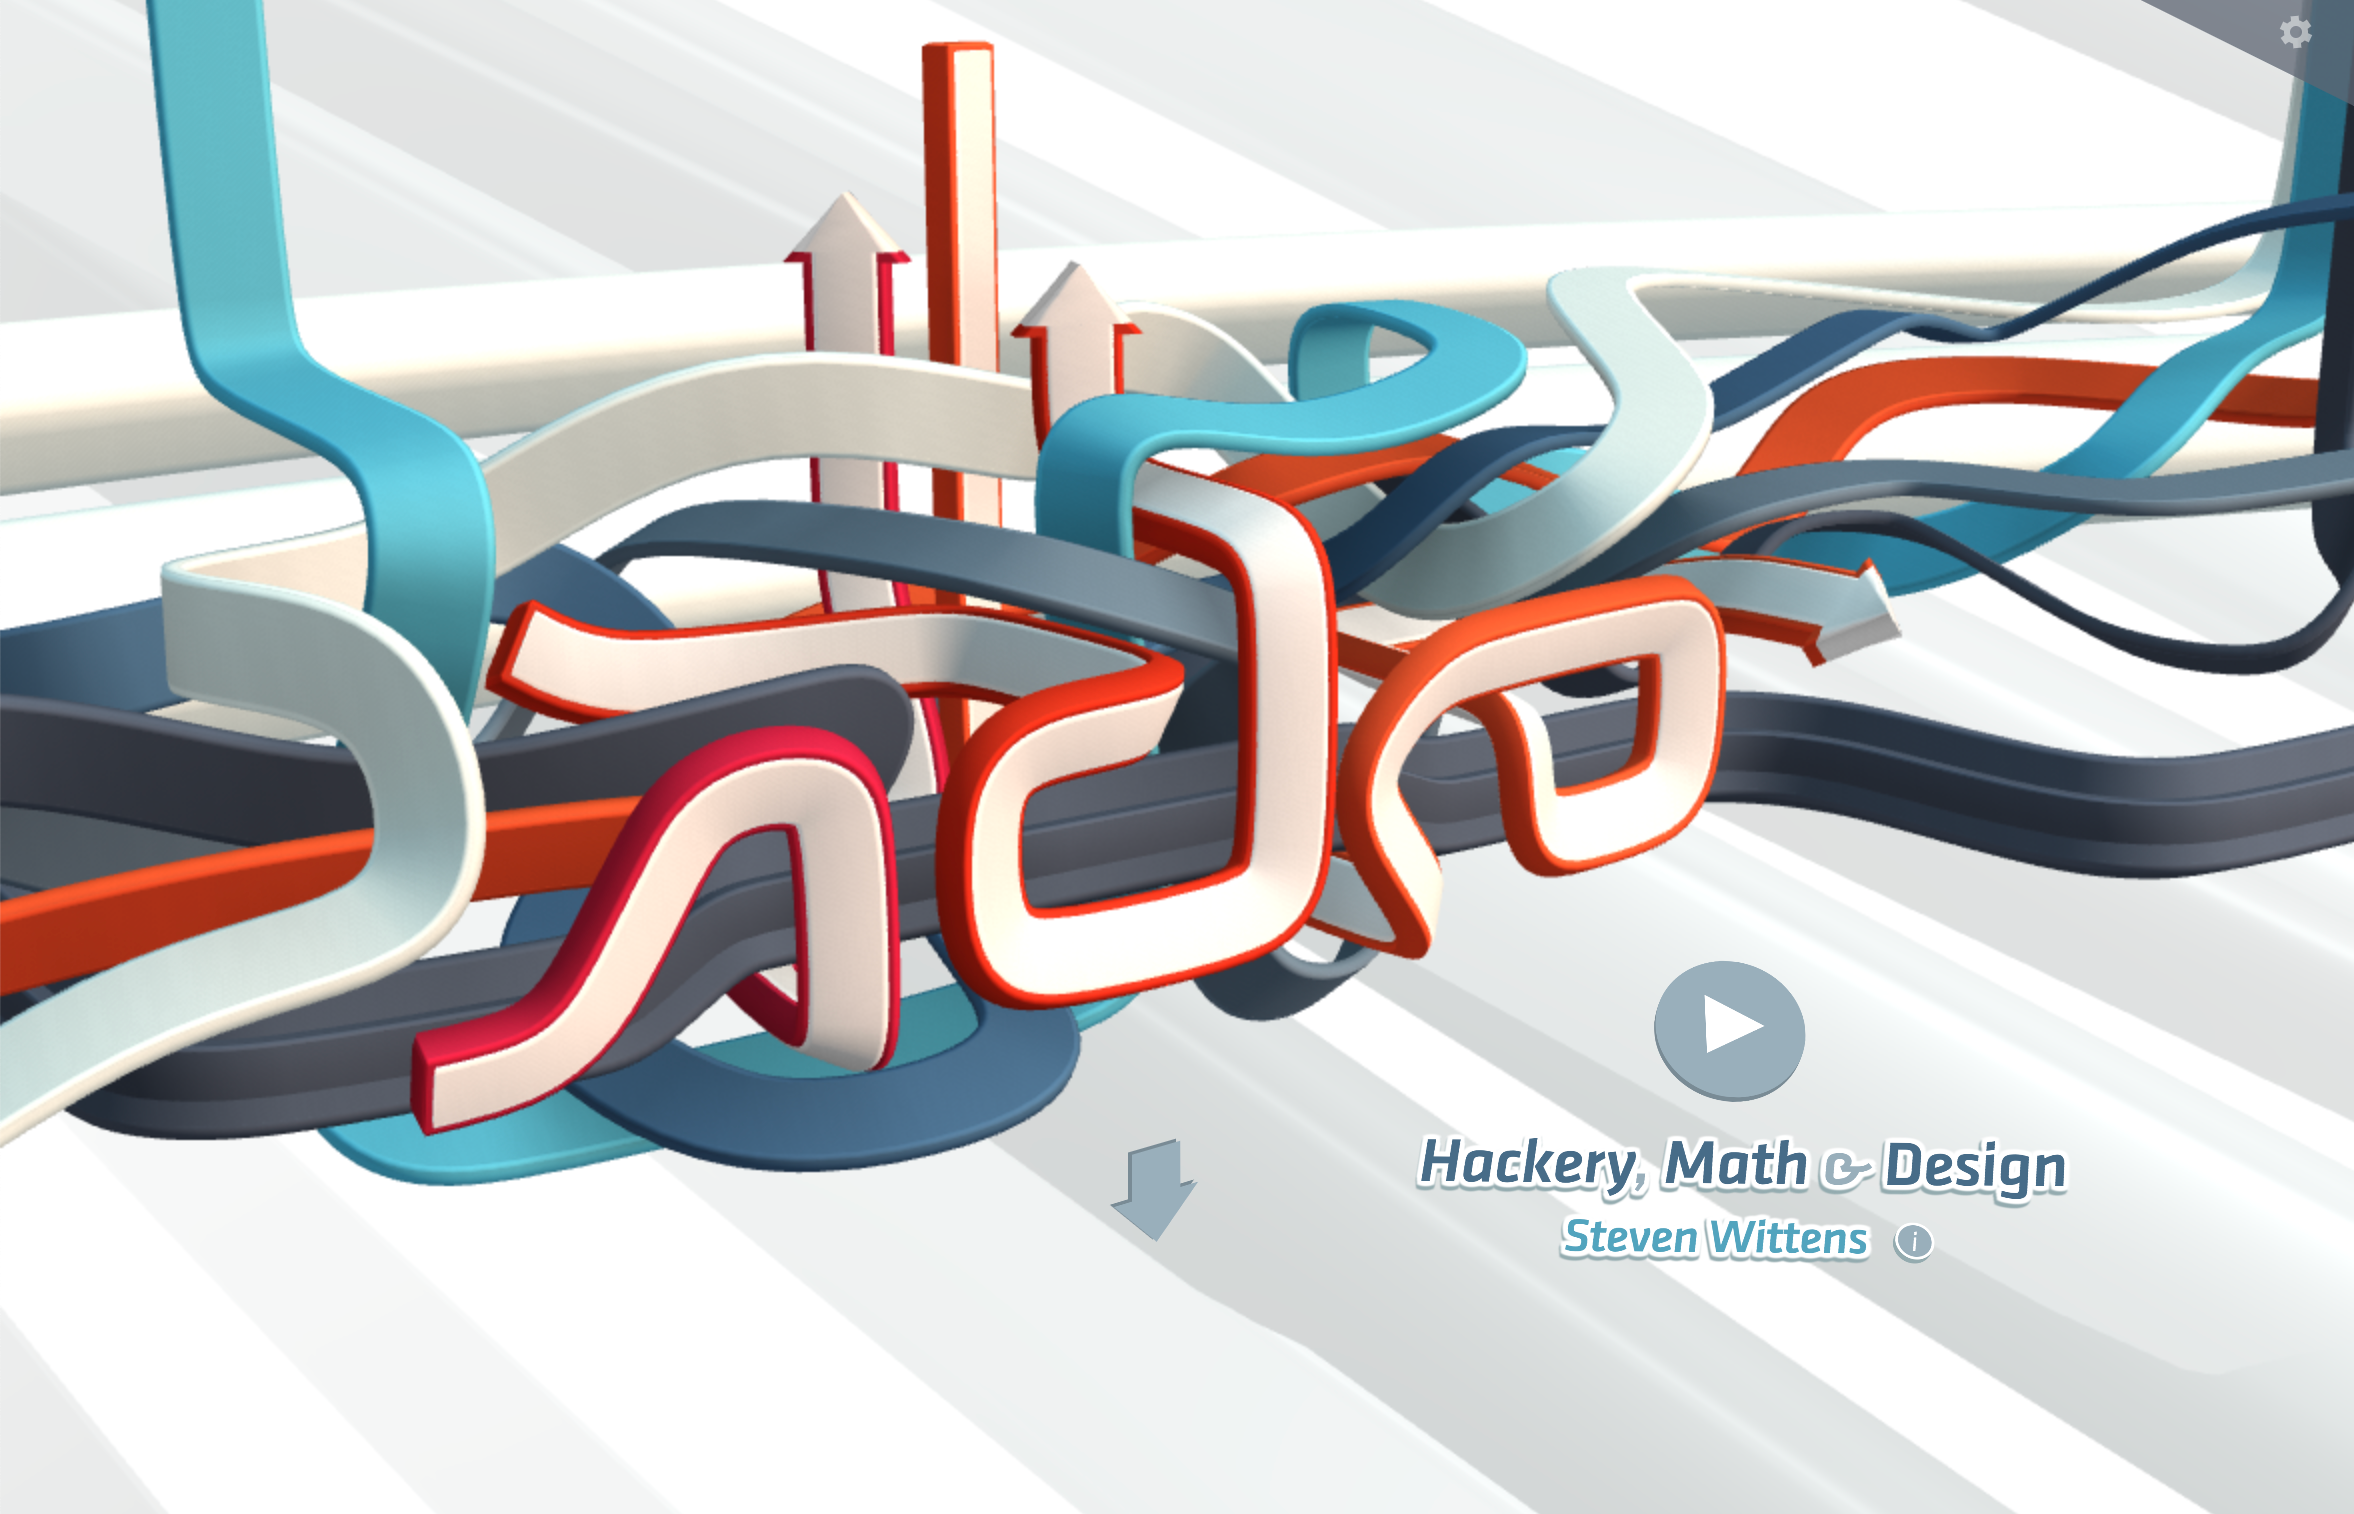 A complicated 3D tangle of white, dark blue, teal, red, and white arrows fill up most of the screen. Part of the tangle spells out the phrase, 'Acko.' Below it is the tagline, 'Hackery, Math, and Design', and below that is the name, 'Steven Wittens'. Screenshot.